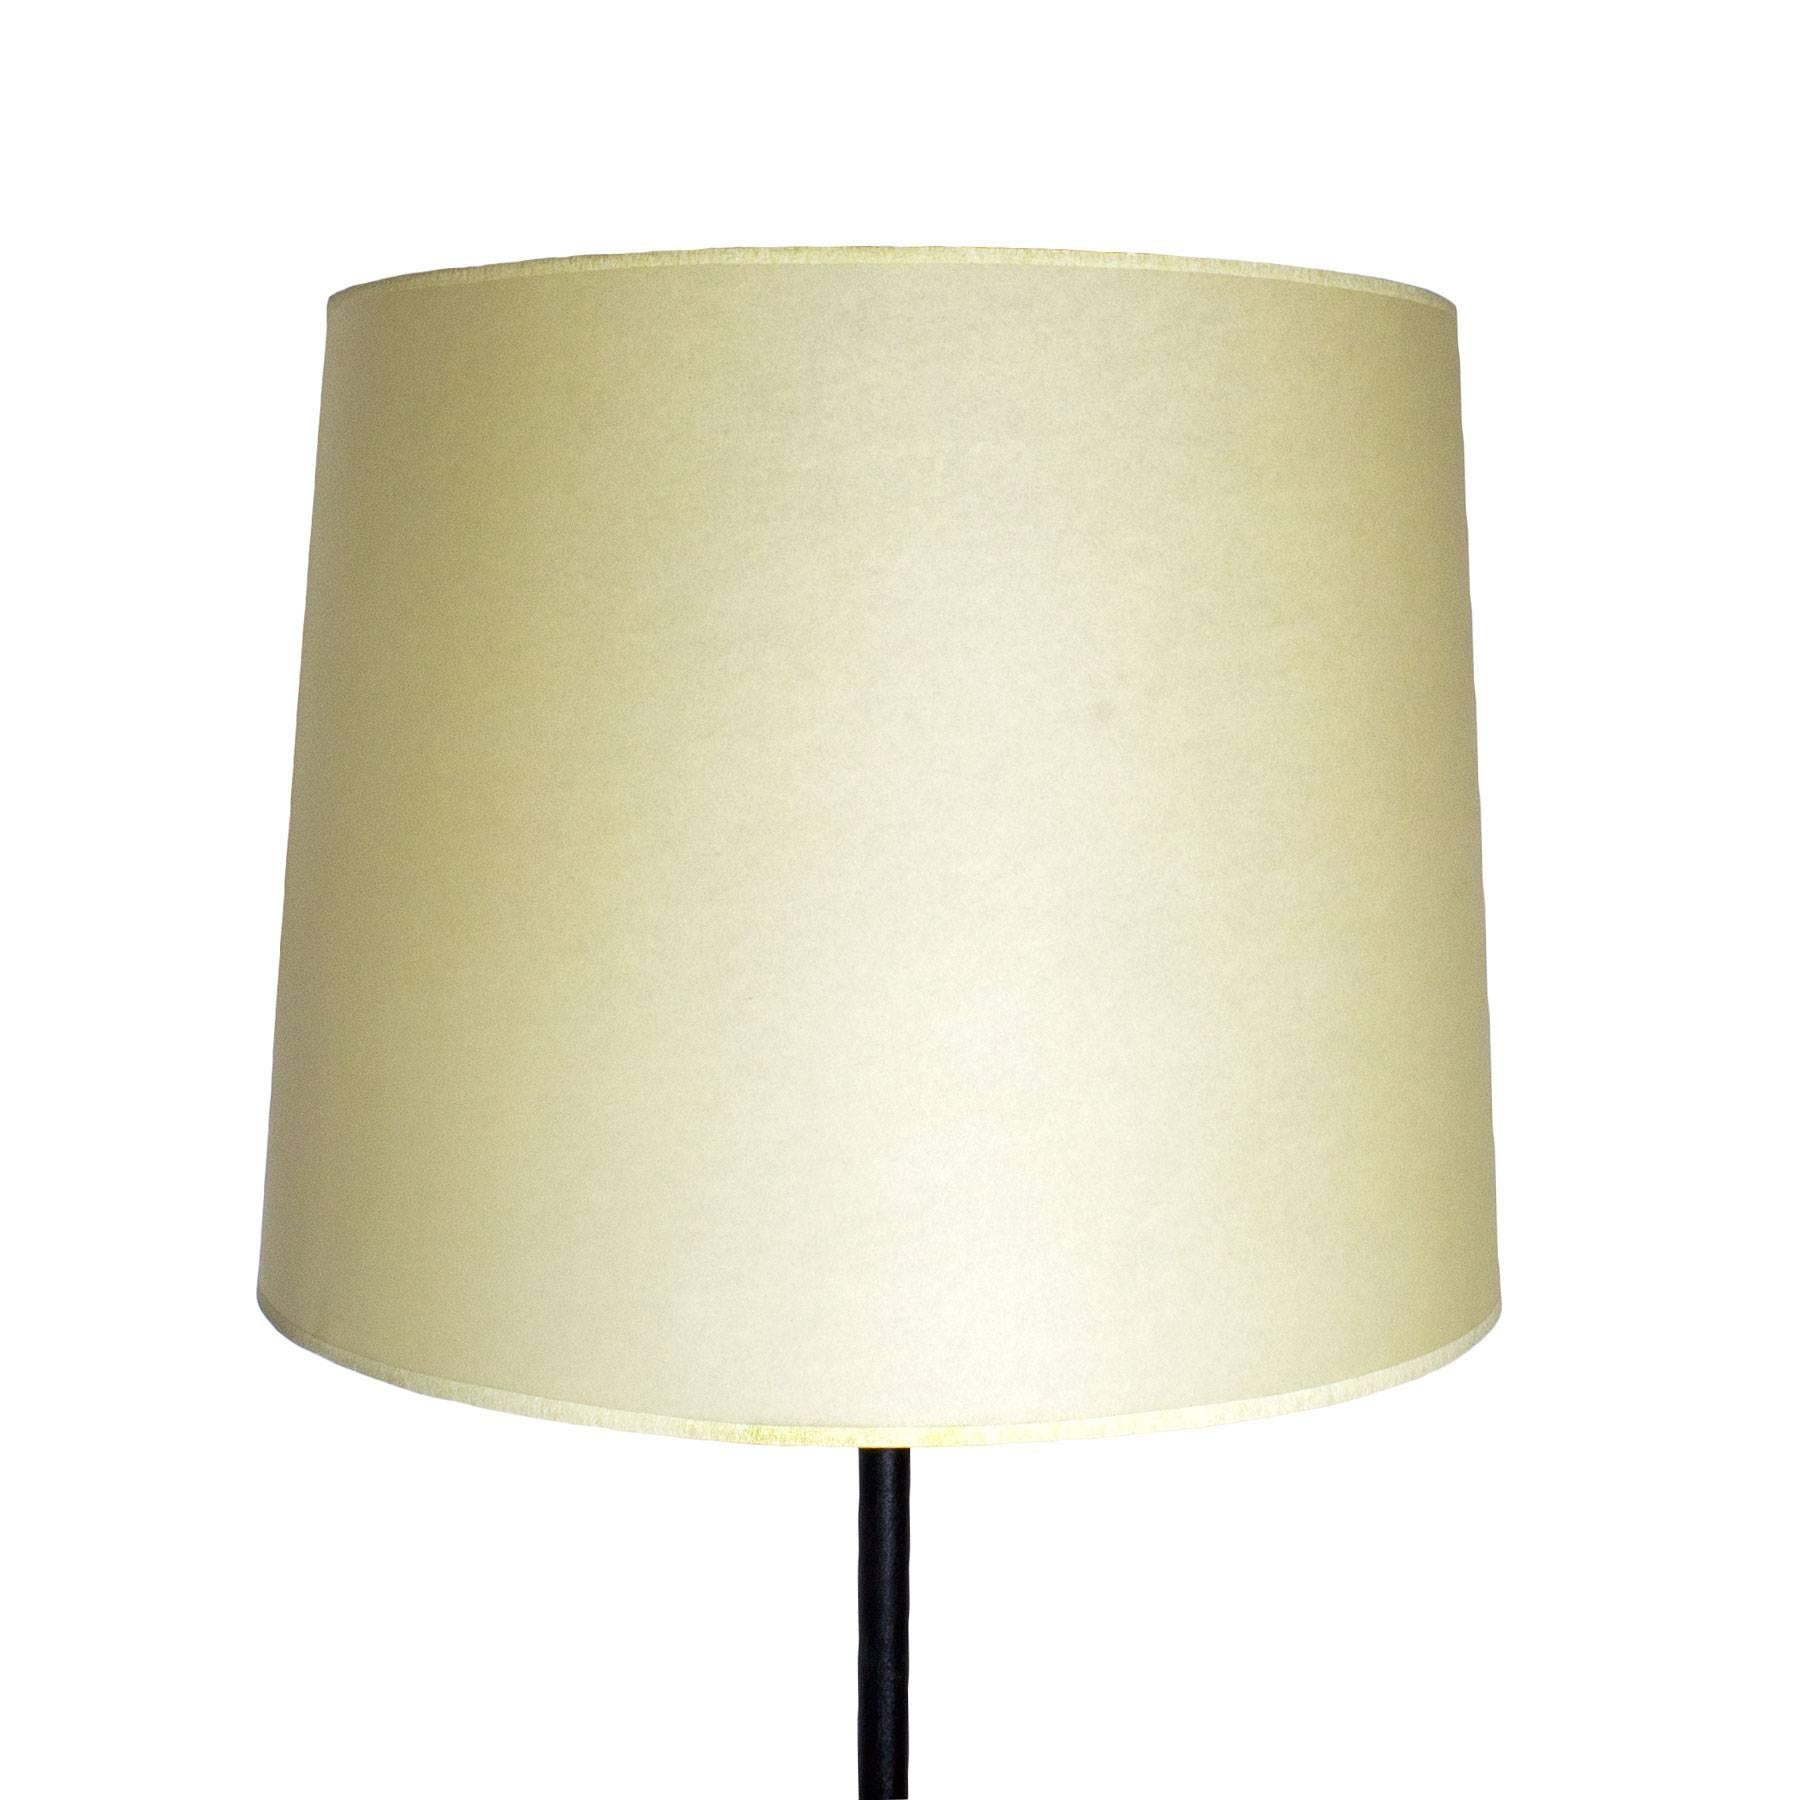 Mid-20th Century Mid-Century Modern Standing Lamp In Steel, Brass, Fabric - Spain For Sale